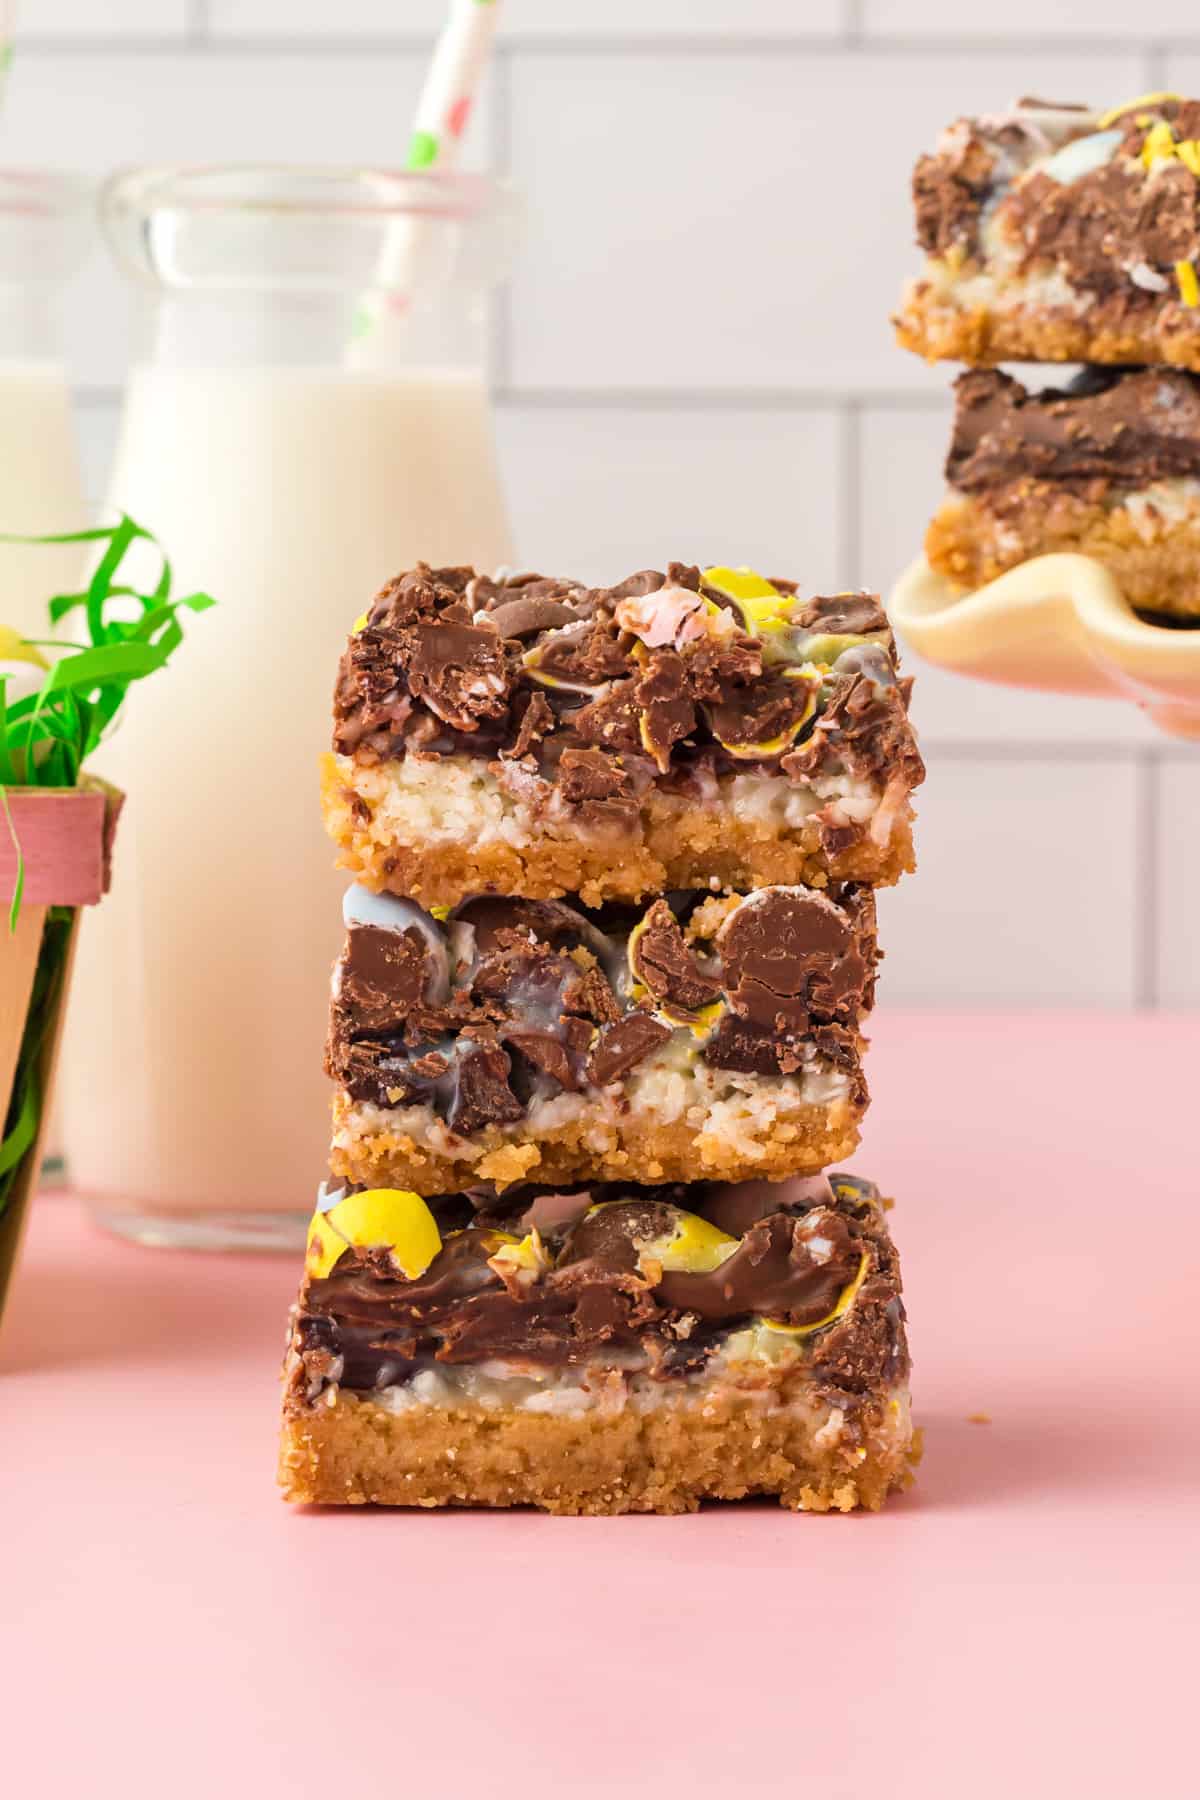 Three thick easter dessert bars stacked on top of one another with glass of milk and additional bars in the background.